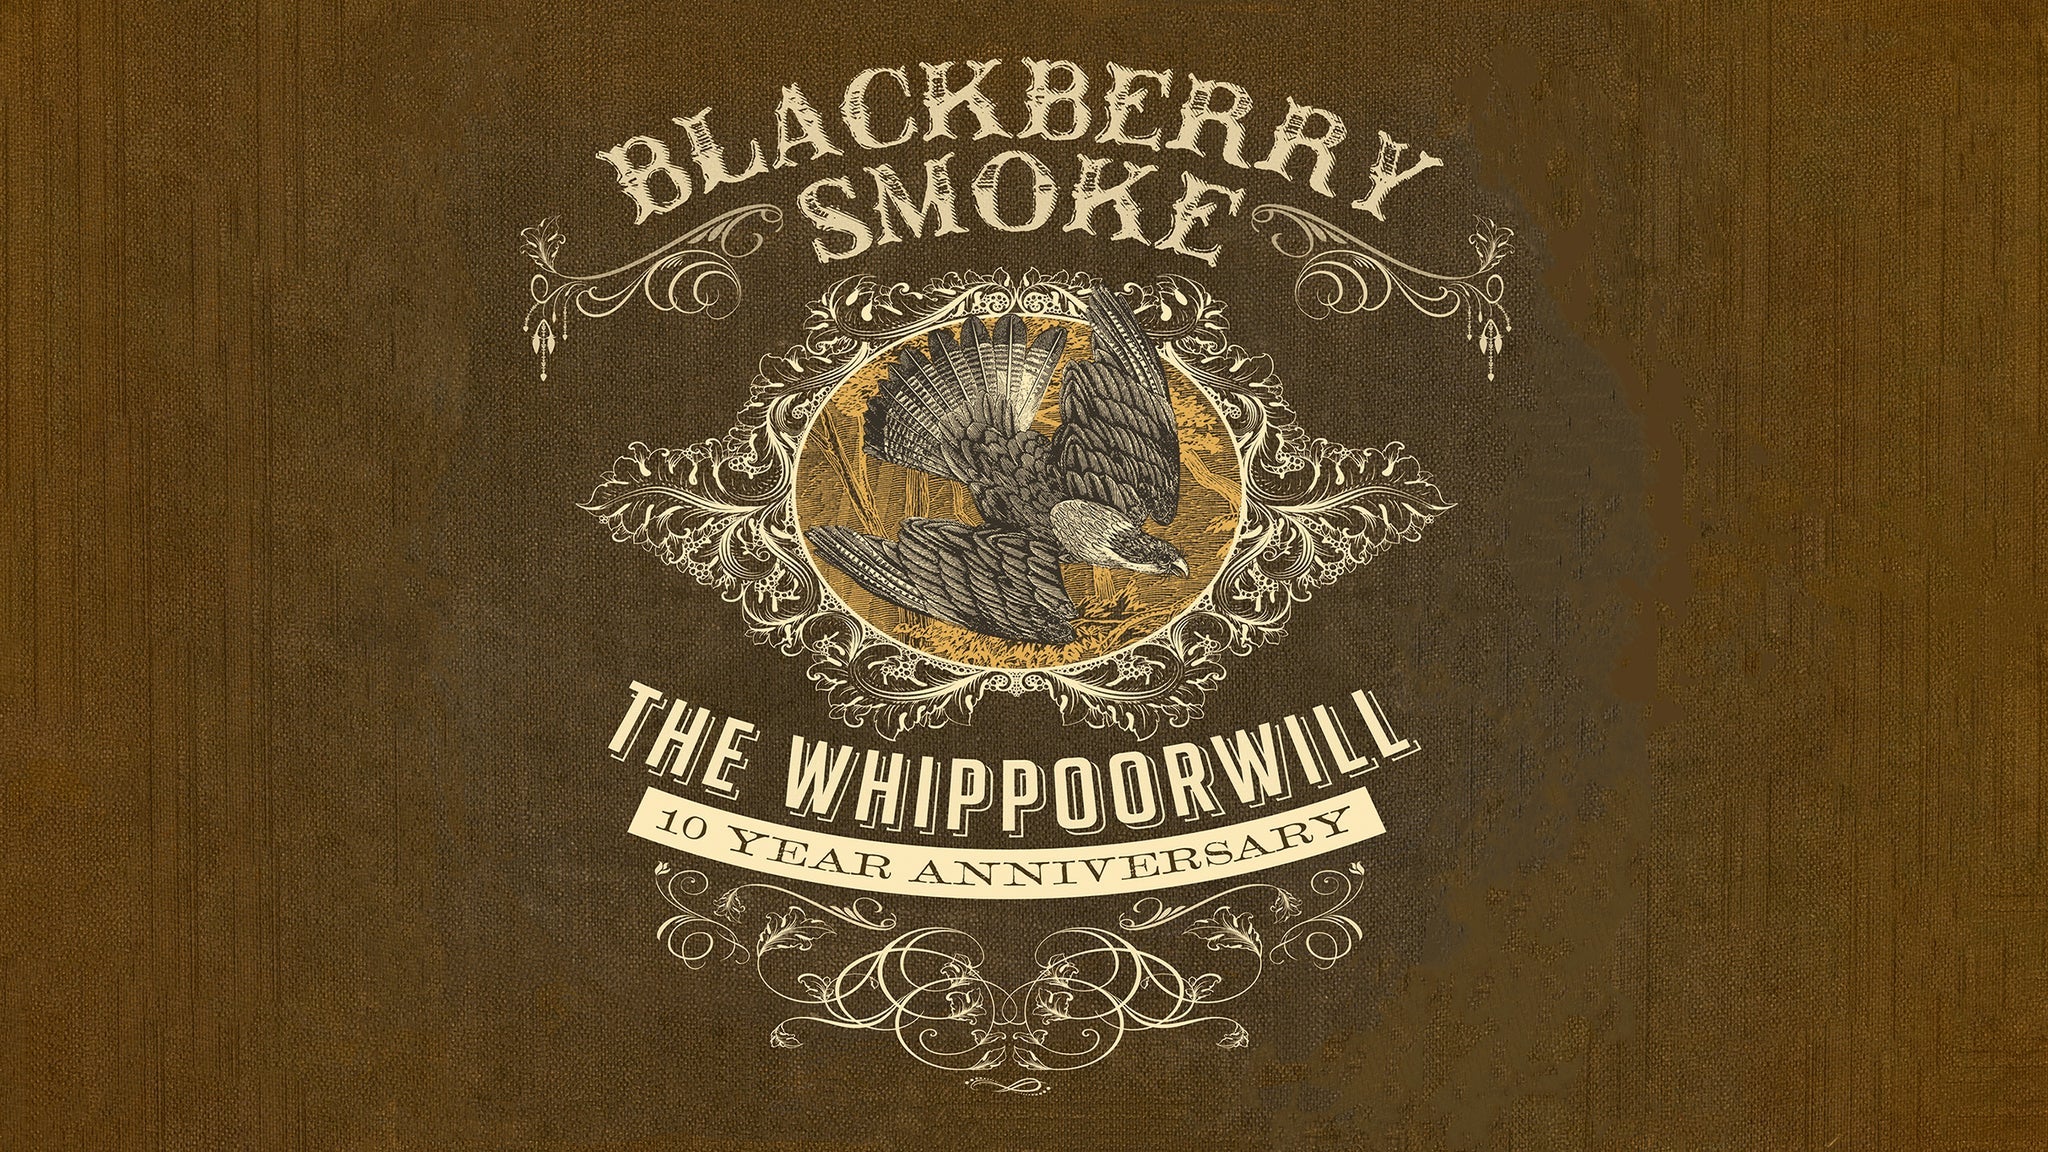 Blackberry Smoke - The Whippoorwill 10 Year Anniversary in Charlottesville promo photo for Local presale offer code